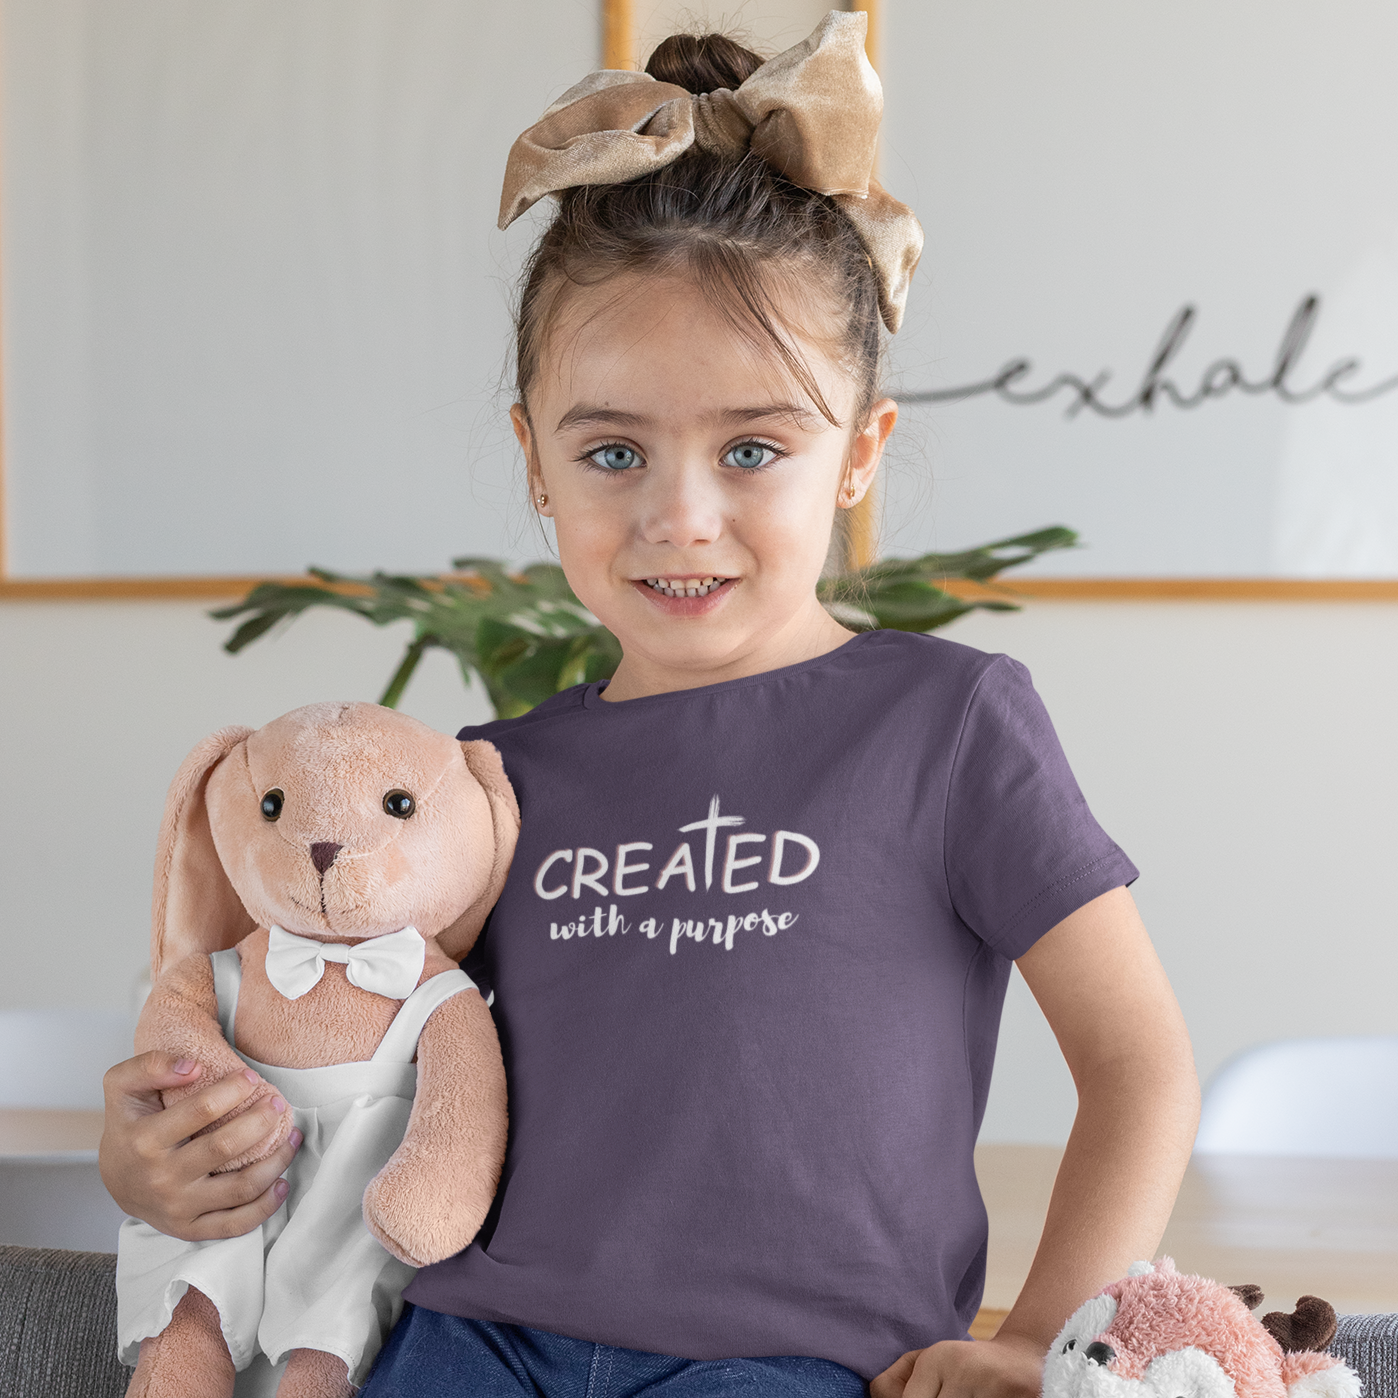 Kids Christian T-shirt | Created With A Purpose | Unisex